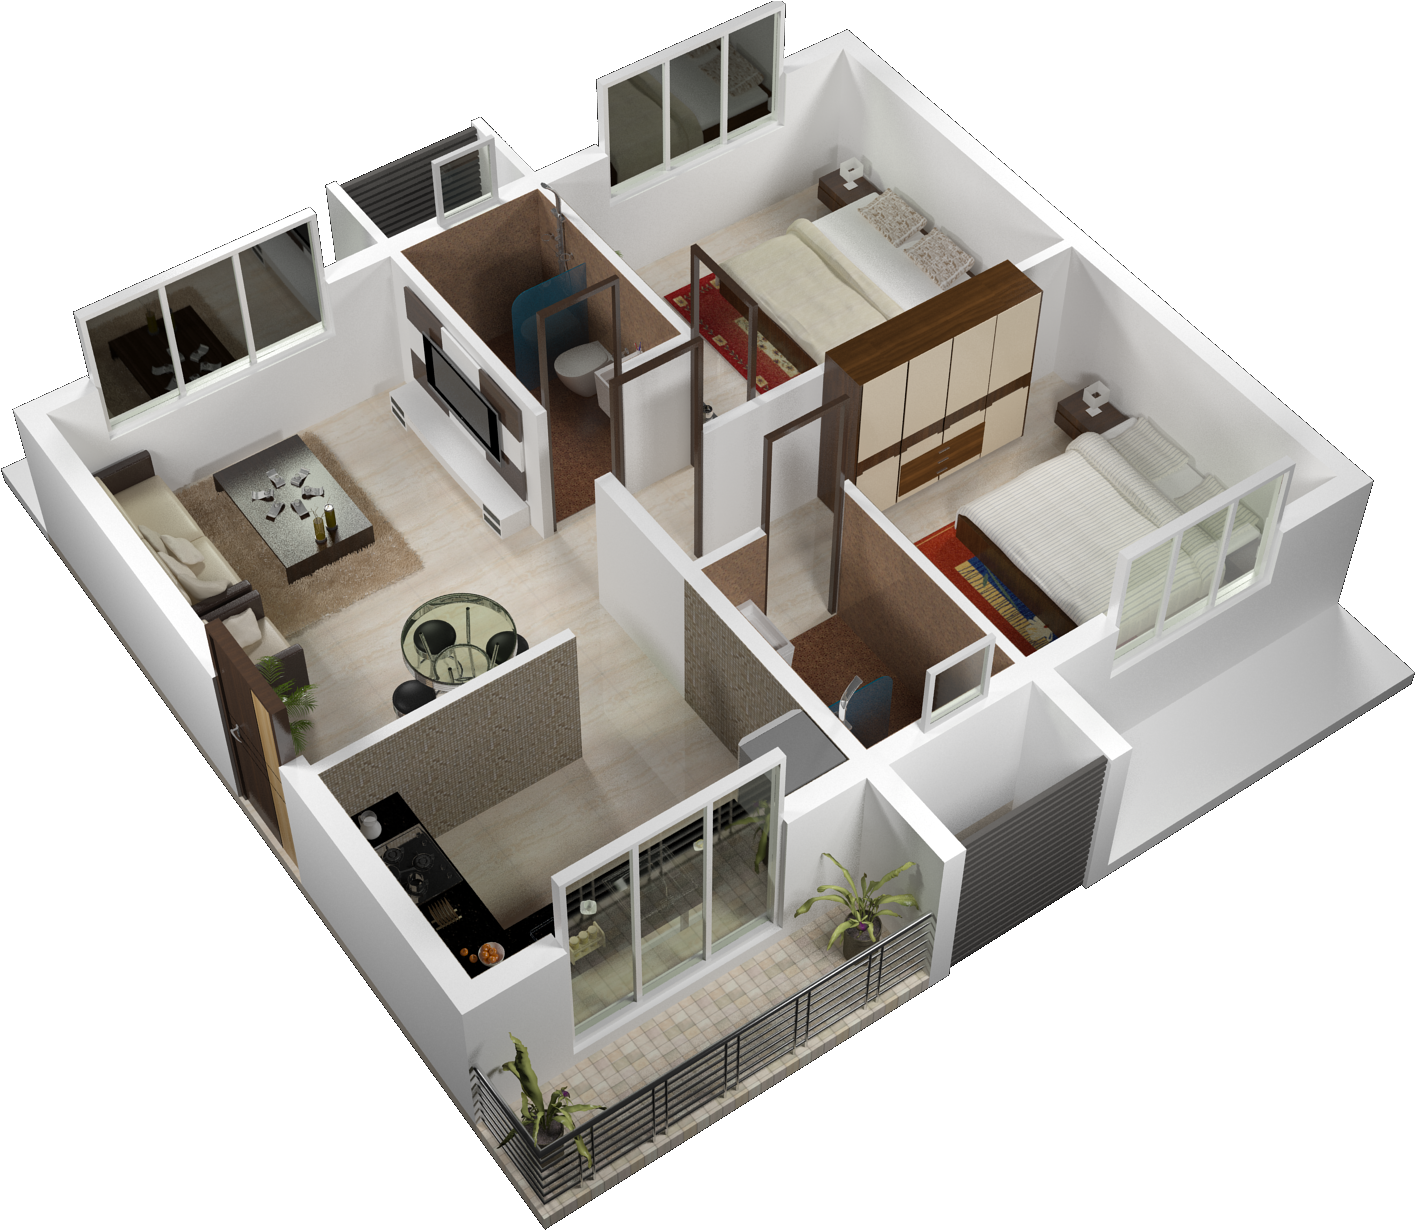 Staggering 3d House Plans In Chennai 10 600 Sq Ft Plan - Staggeri...